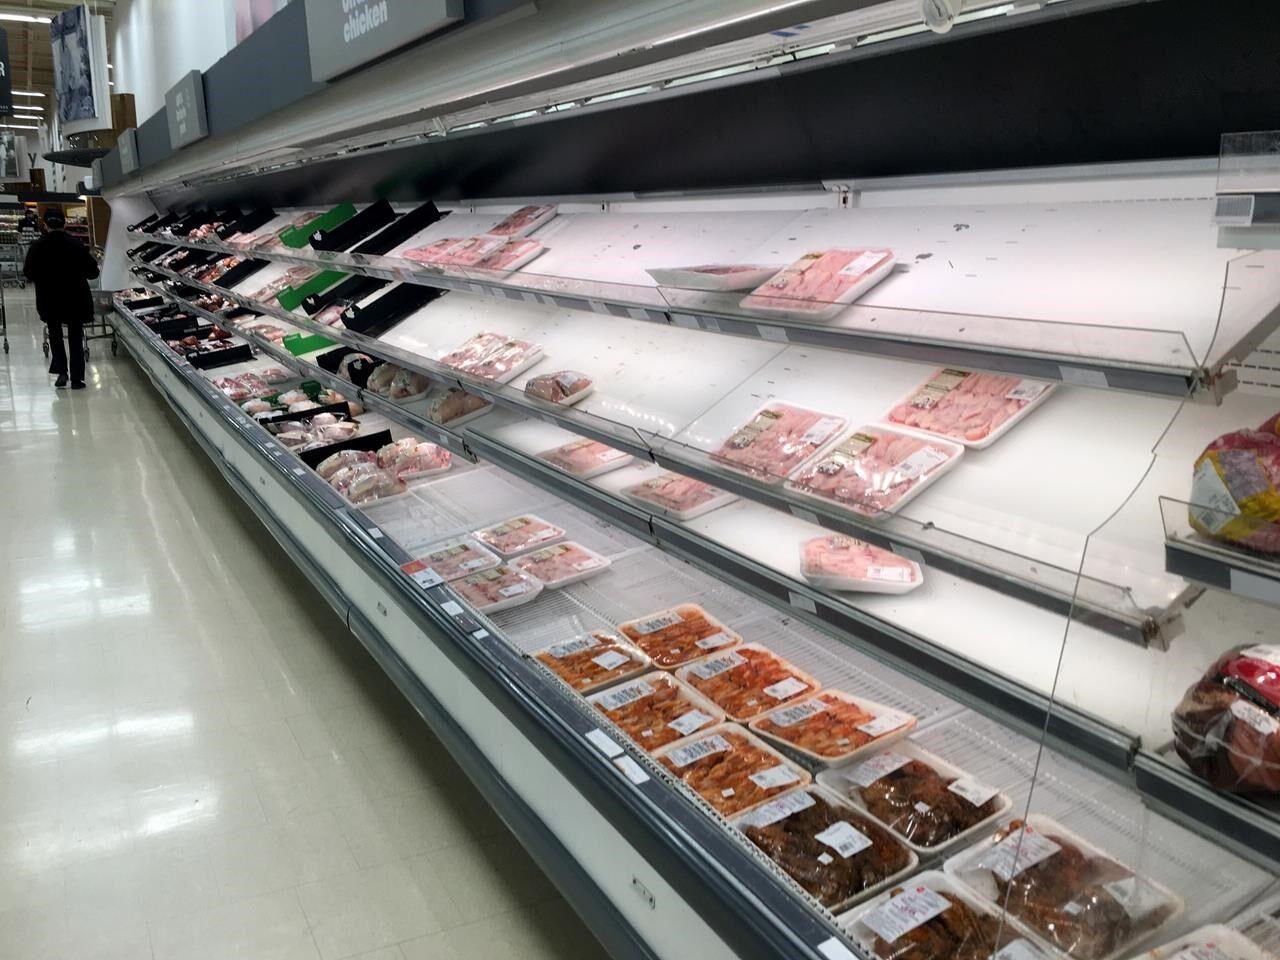 Meat Thefts Spike as Food Prices Soar